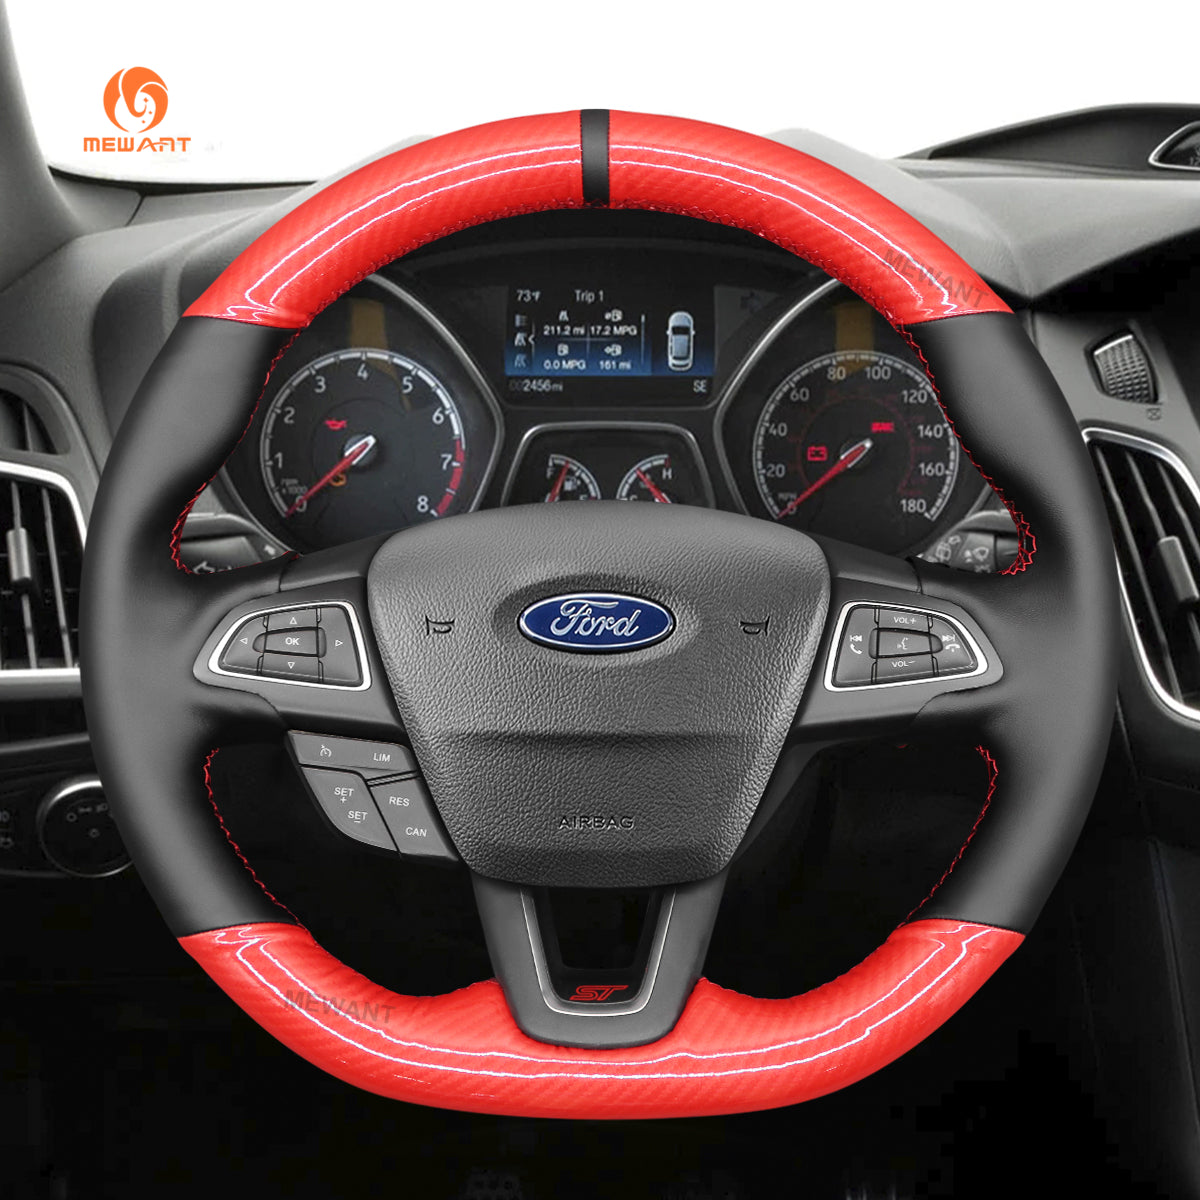 MEWANT Hand Stitch Carbon Fiber Leather Suede Car Steering Wheel Cover for  Ford Mustang 2015 2016 2017 2018 2019 2020